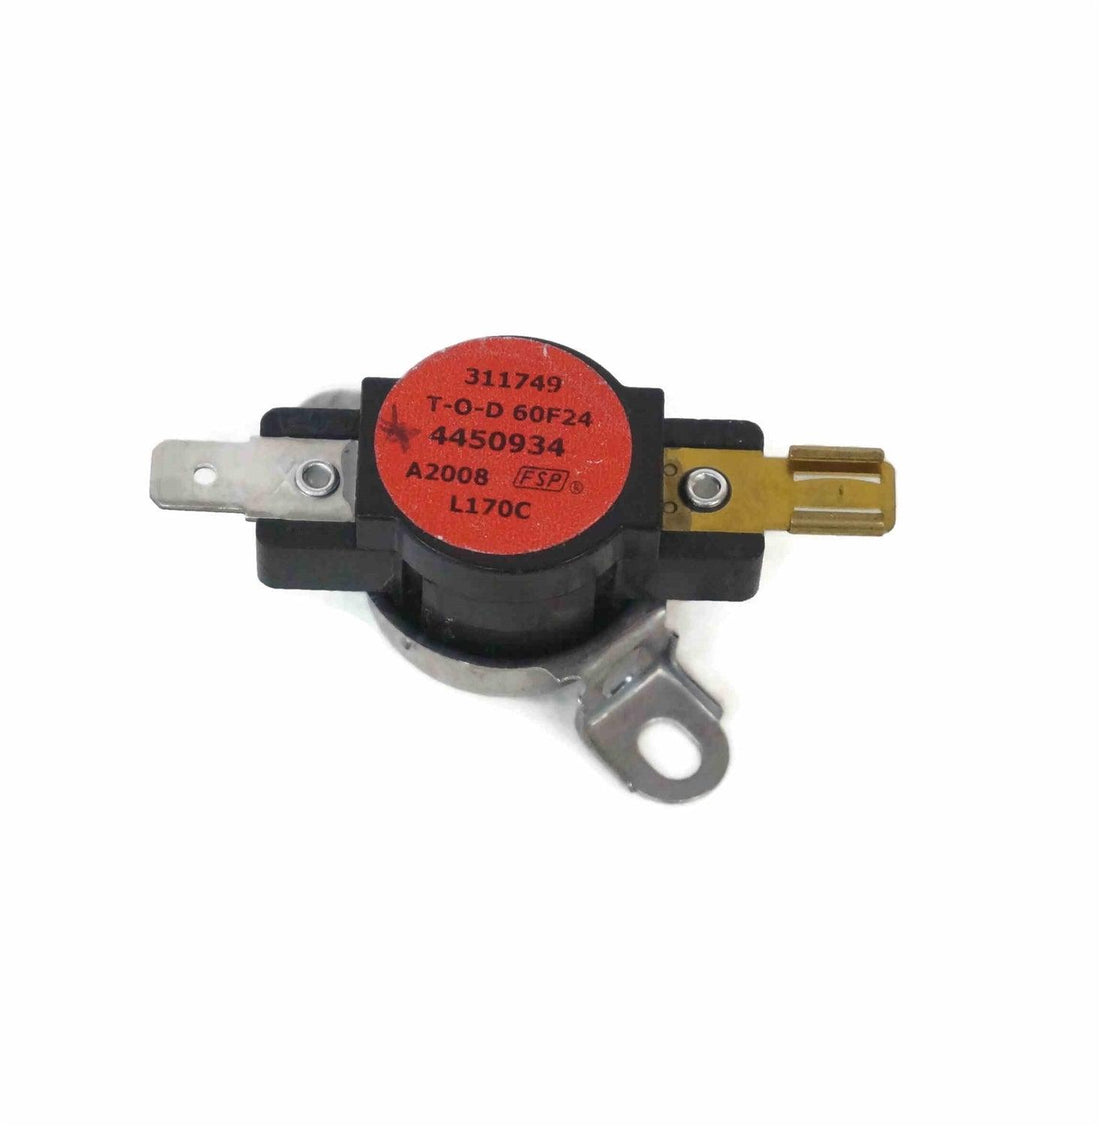 Whirlpool WP4450934 Oven Safety Thermostat